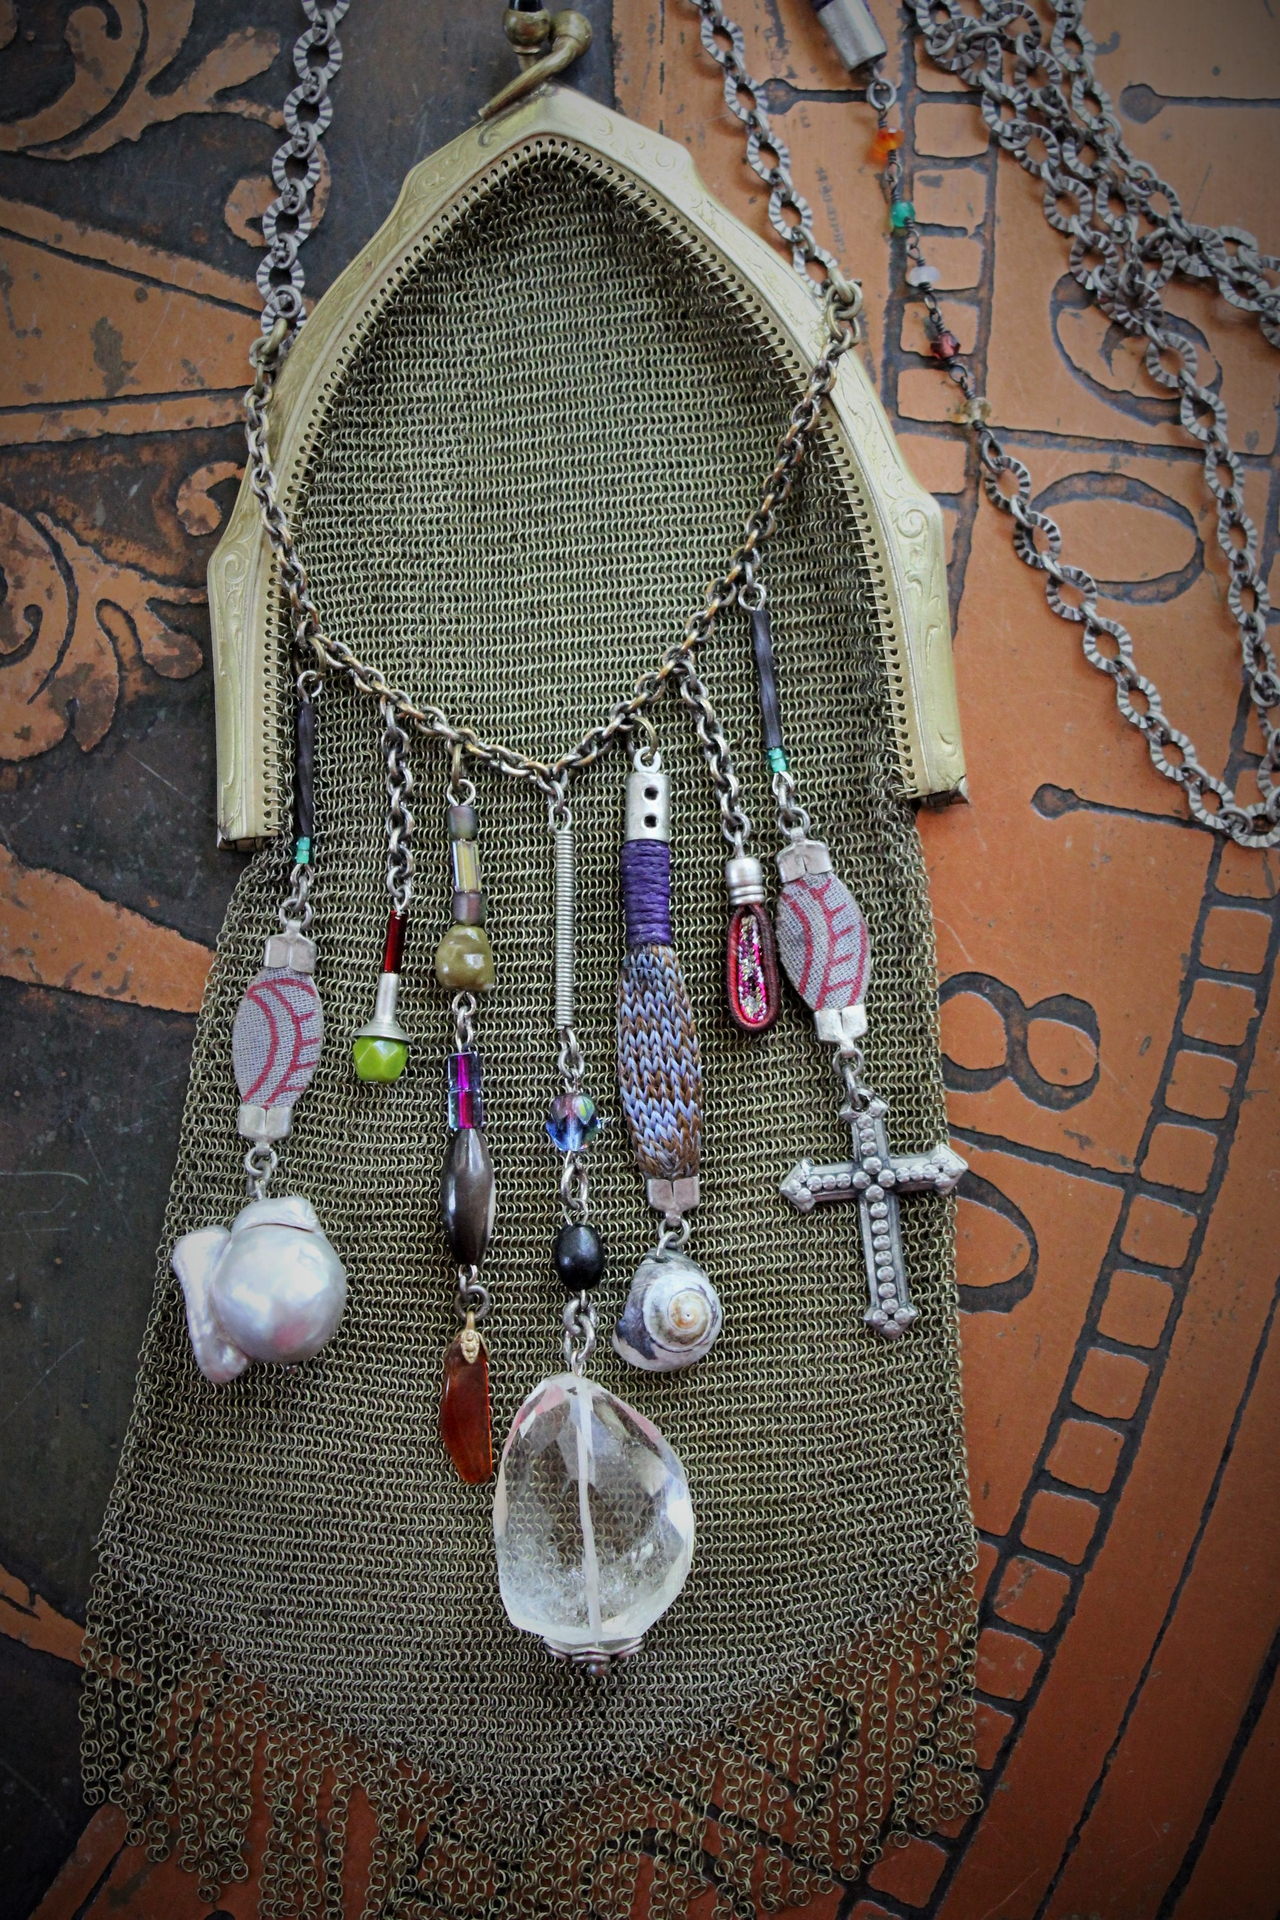 The Bohemian Life Necklace with Antique Whiting & Davis Mesh Pouch, Multiple Dangles & Findings, Antique Fiancee Compact, Faceted Sterling Wire Wrapped Chain Fragments